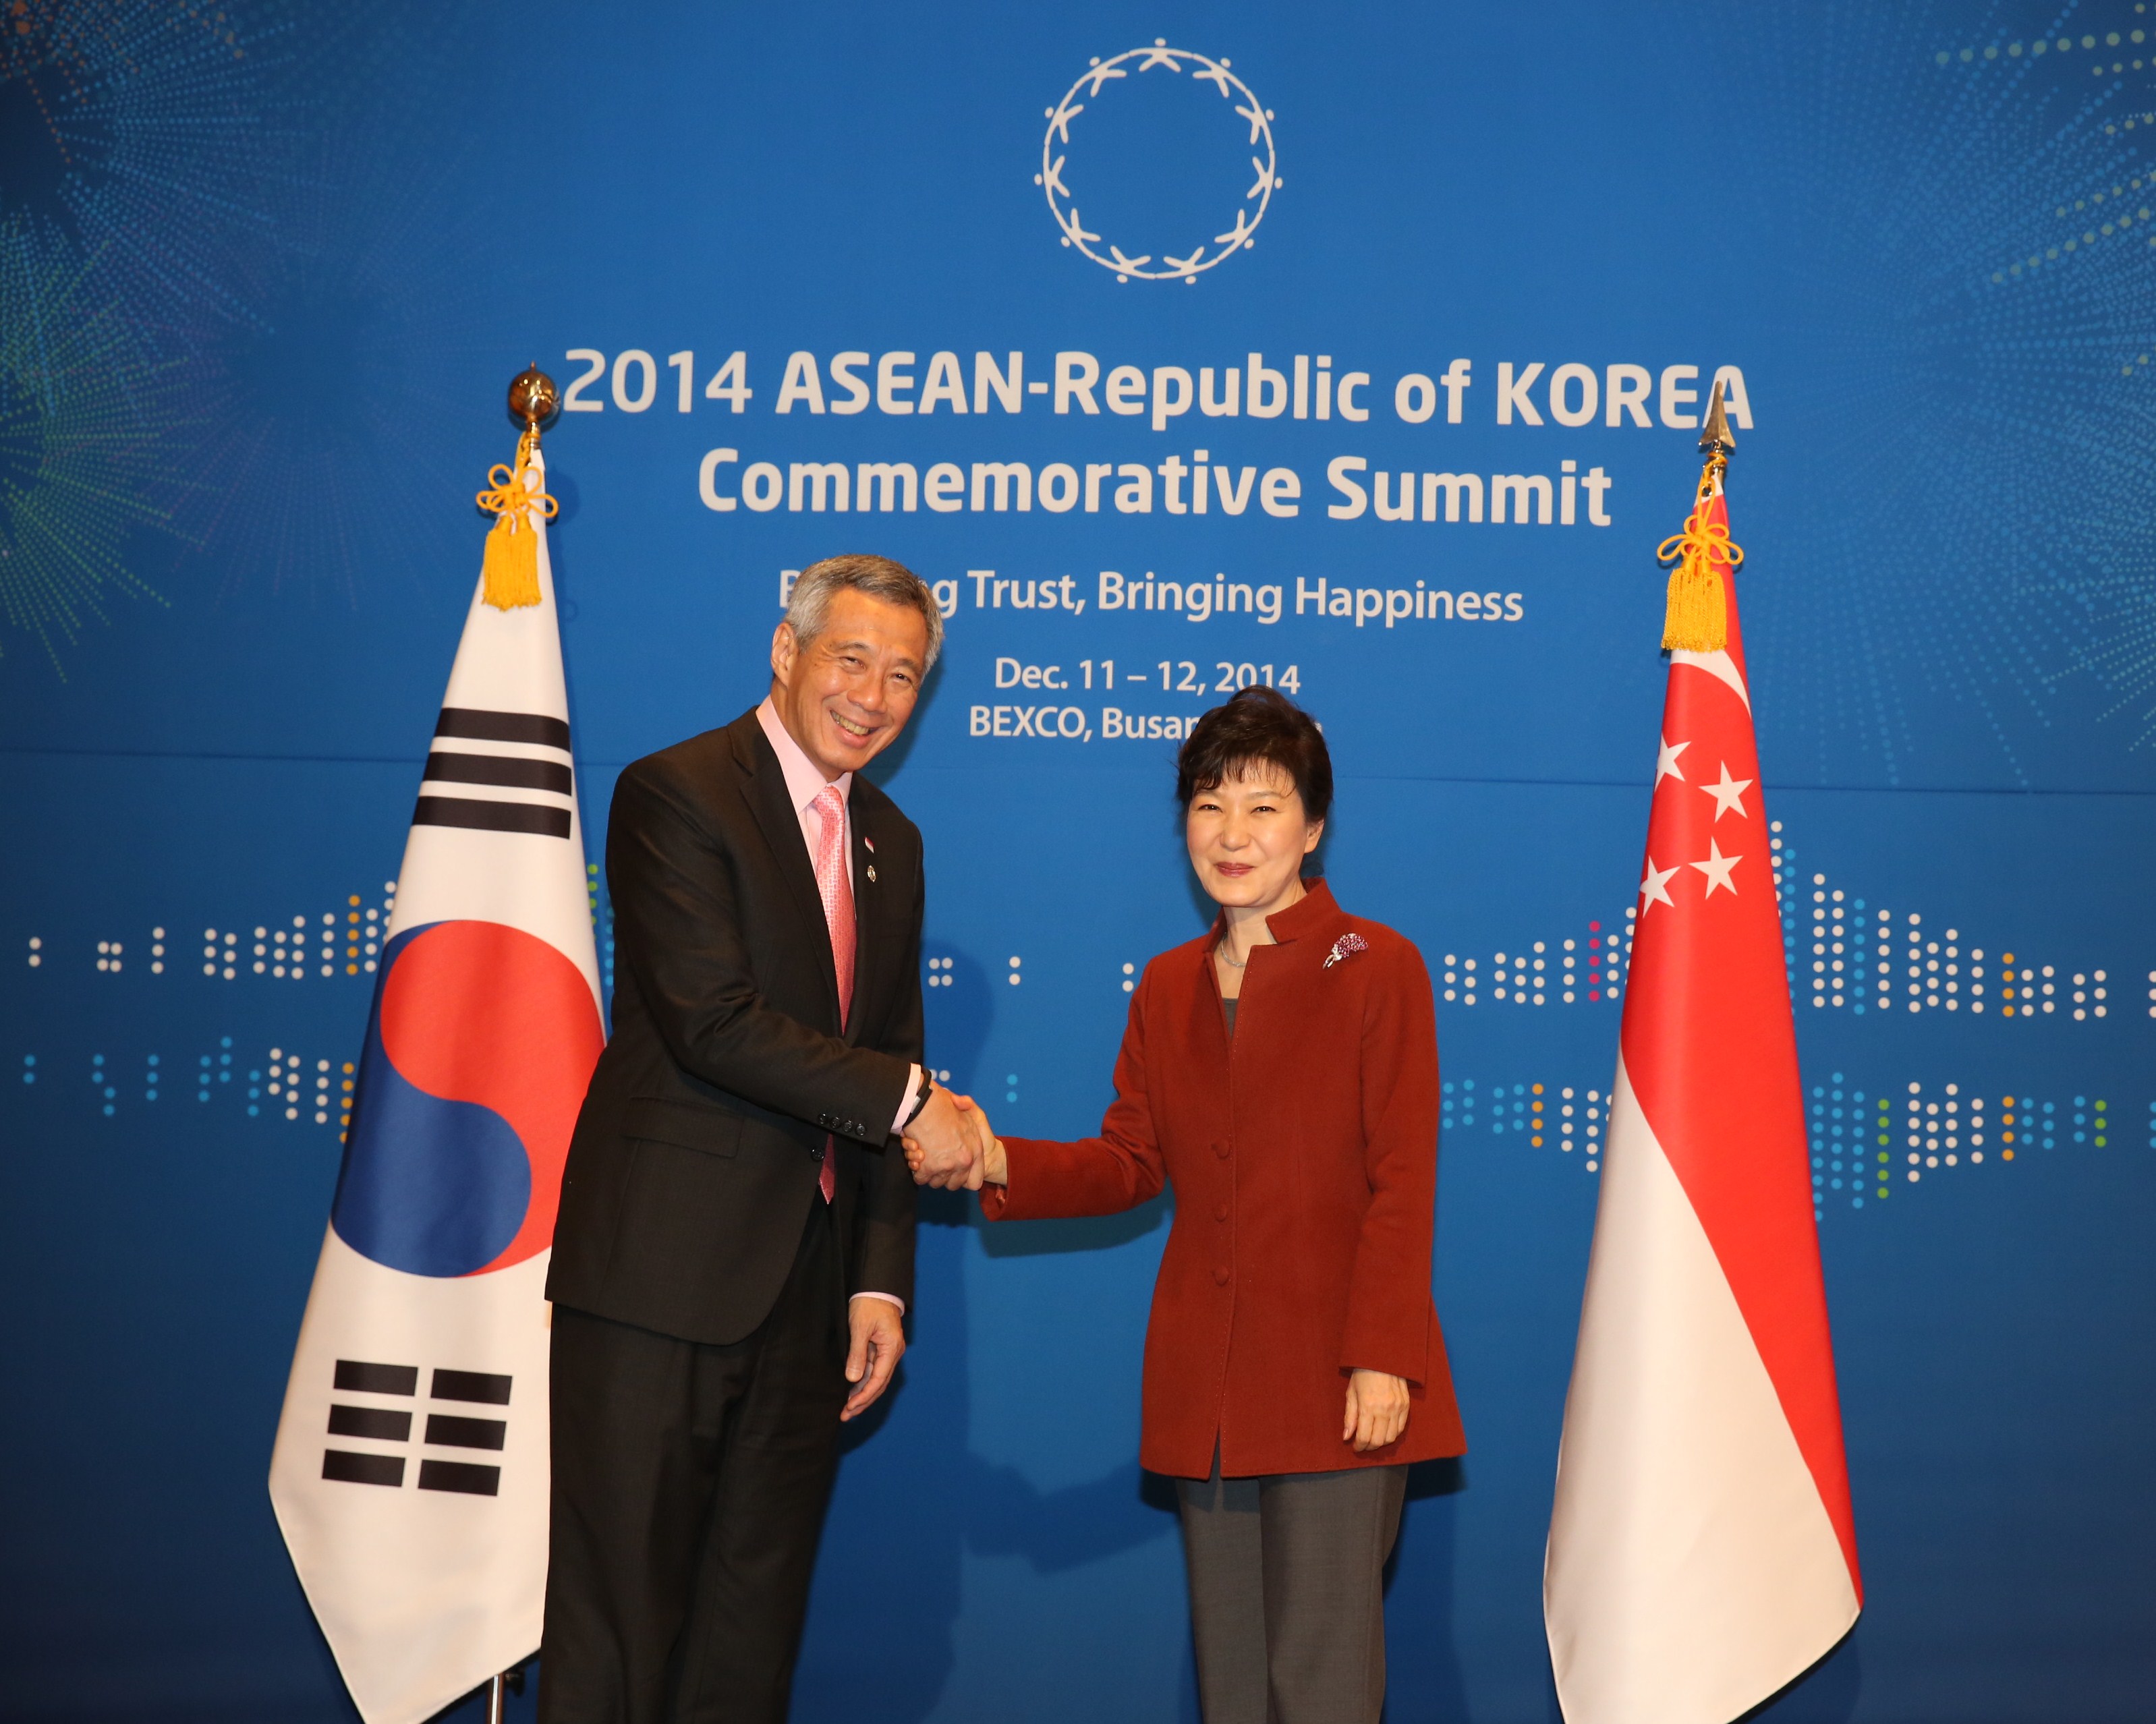 Prime Minister Lee Hsien Loong attending the ASEAN-ROK Commemorative Summit - Dec 2014 (MCI Photo by Chwee)